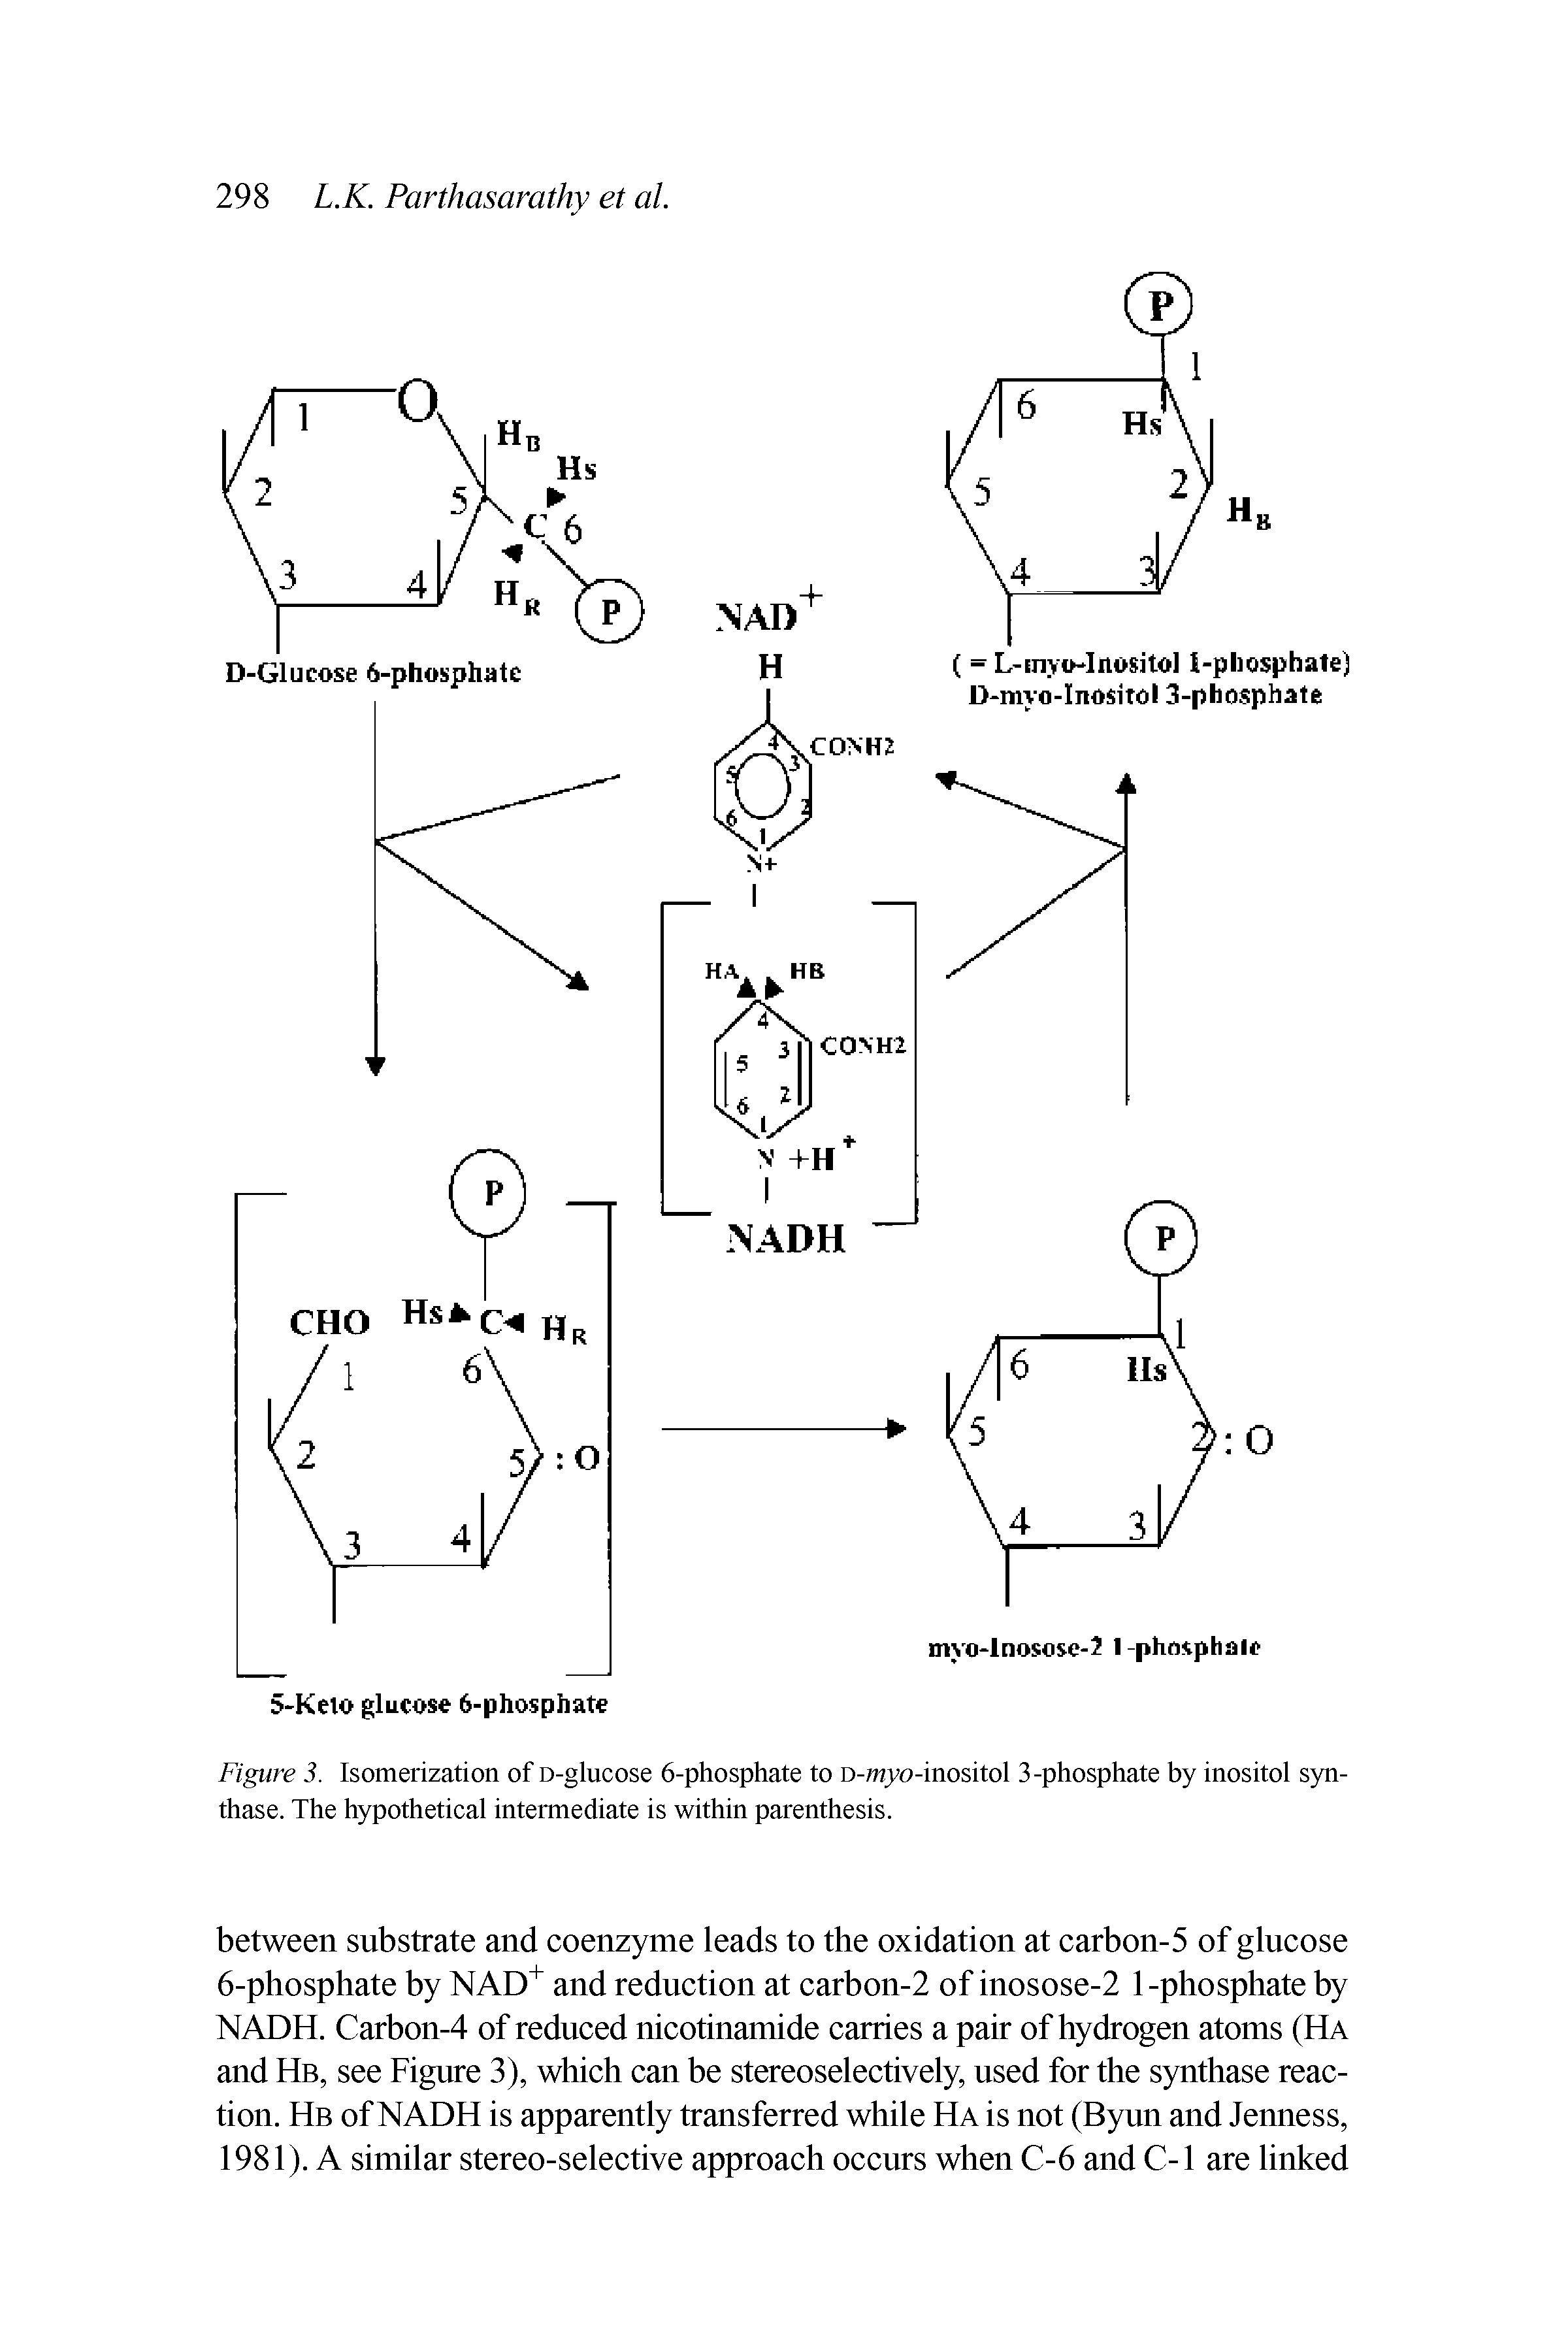 Figure 3. Isomerization of D-glucose 6-phosphate to D-myo-inositol 3-phosphate by inositol synthase. The hypothetical intermediate is within parenthesis.